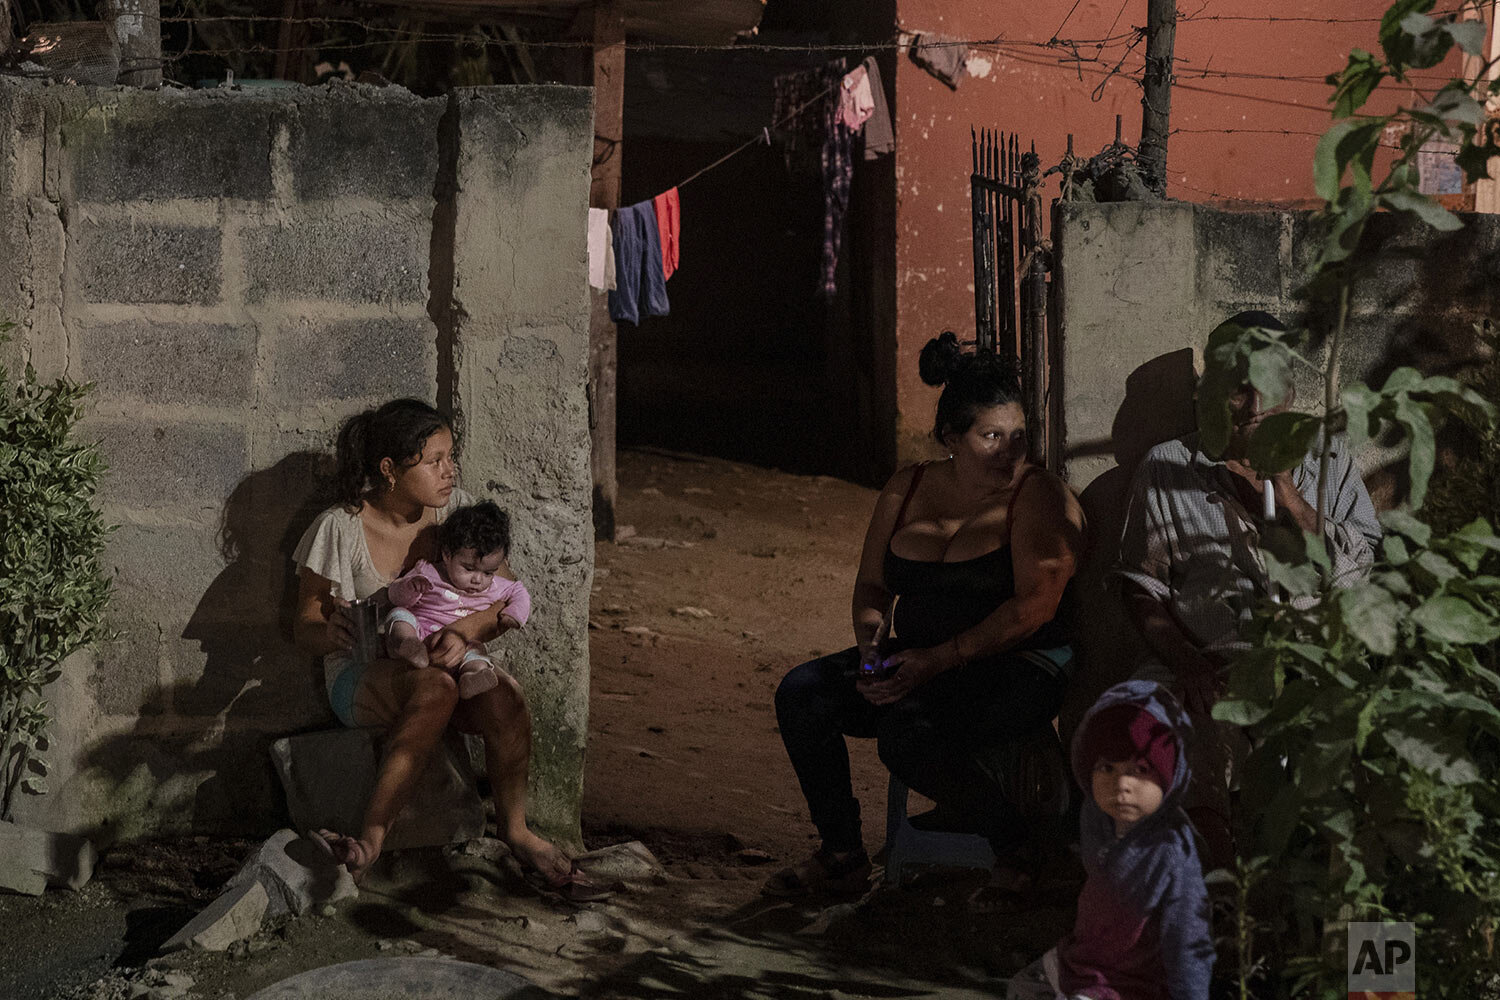  In this photo published in December, a family sits outside their home as forensic workers investigate a body at a crime scene in the Rivera Hernandez neighborhood of San Pedro Sula, Honduras, Nov. 30, 2019. The shifting lines of control of the vario